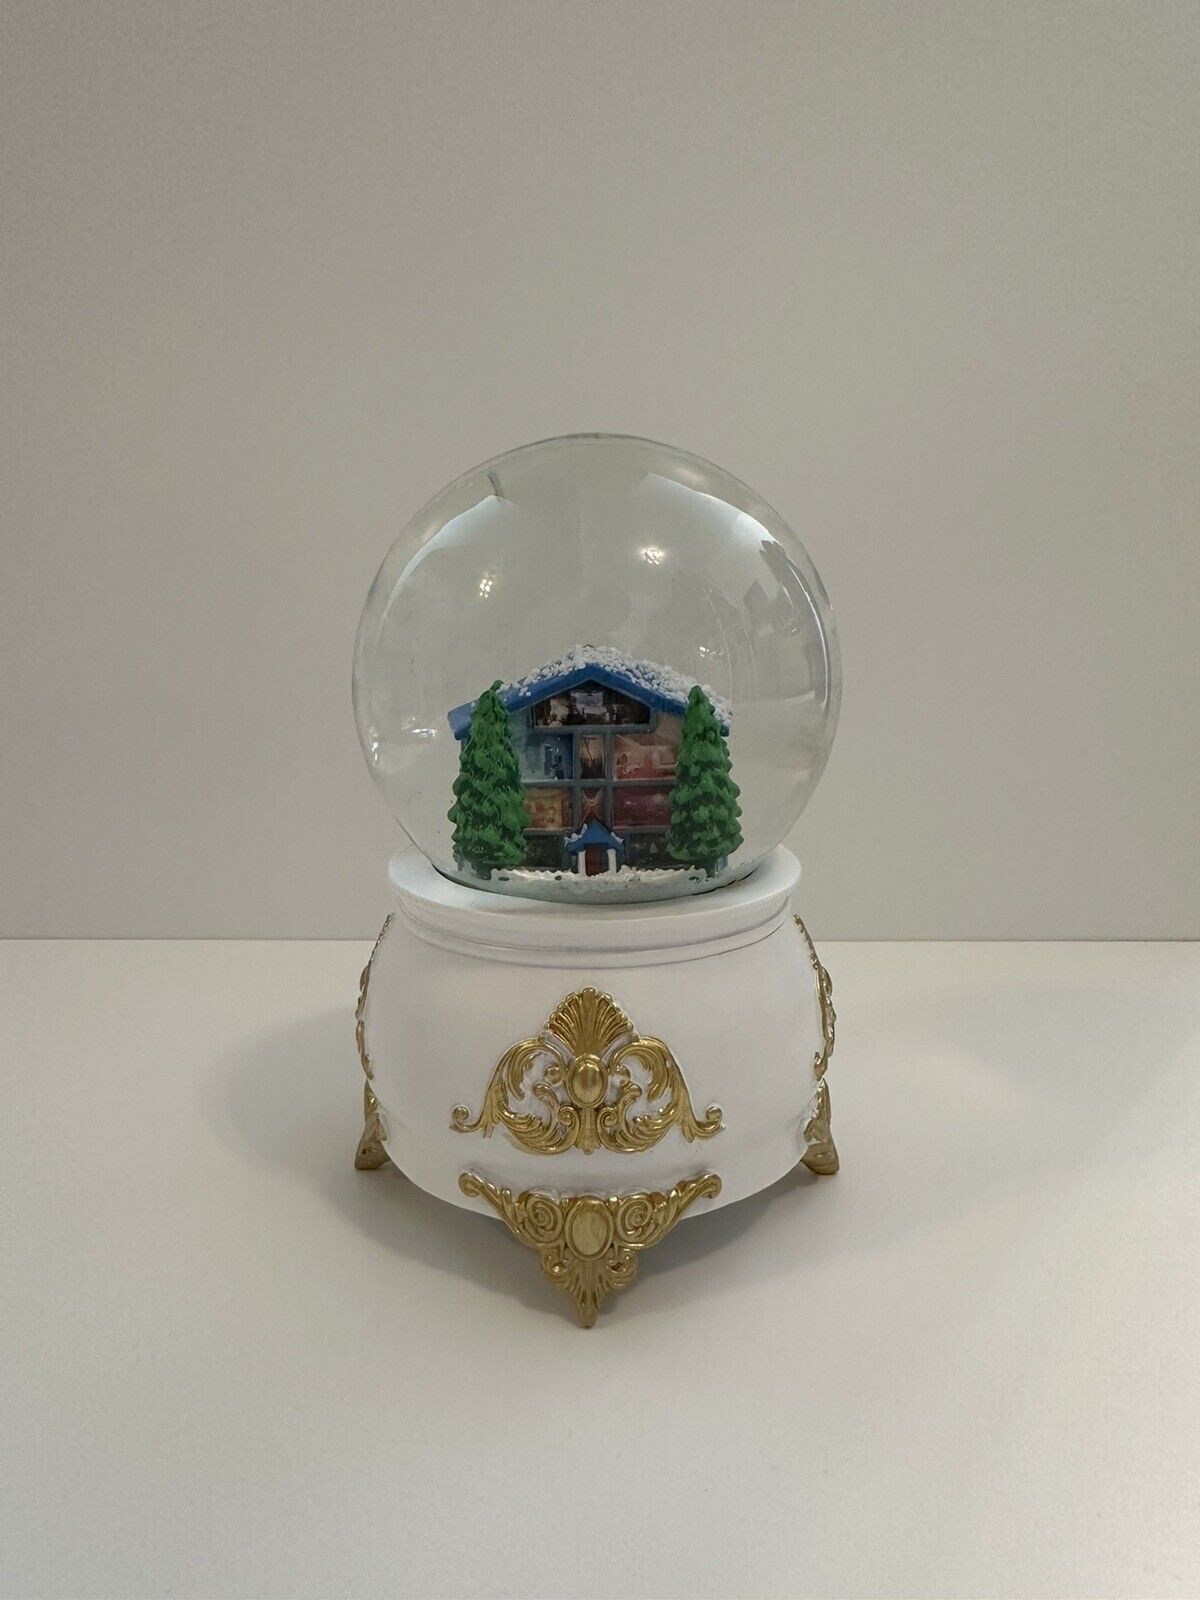 NEW Taylor Swift Lover House Snow Globe, With Box, Plays Music